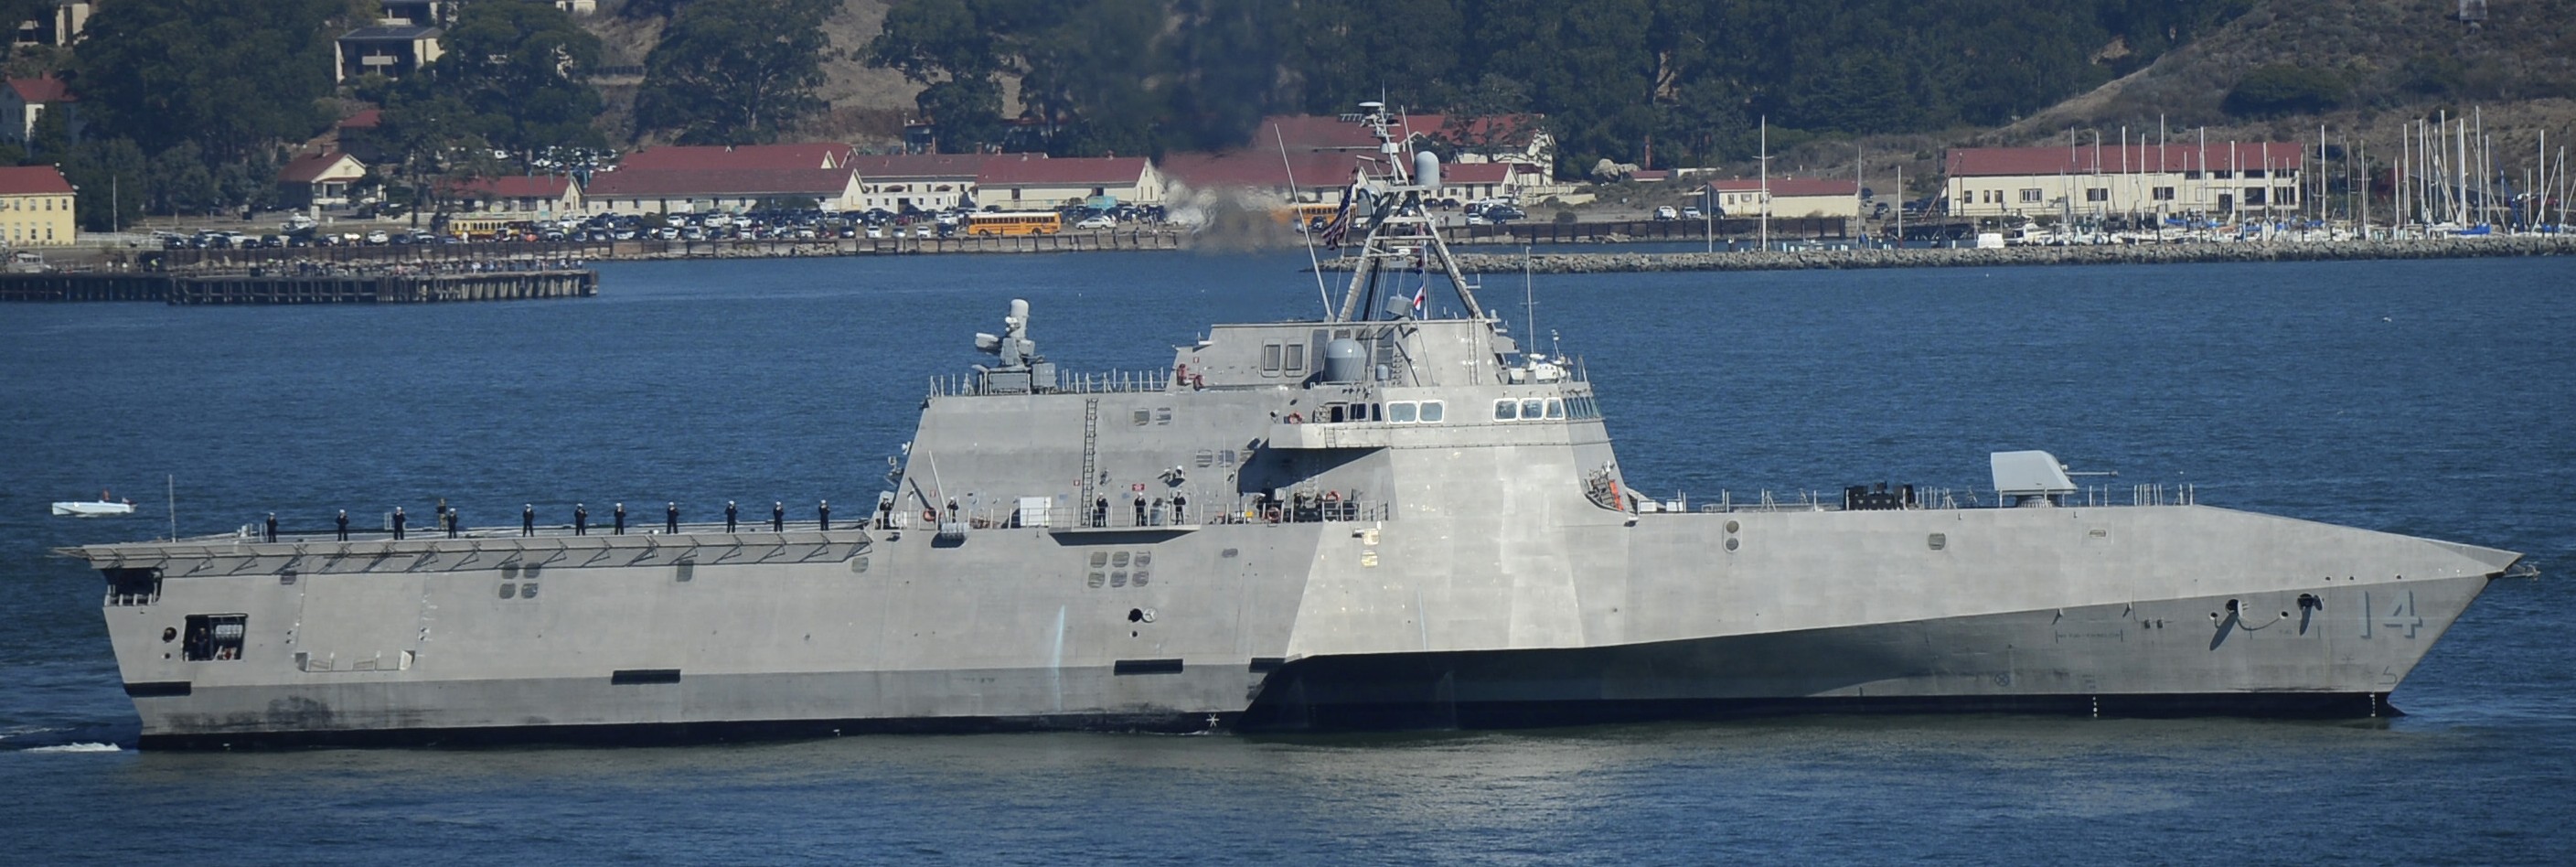 lcs-14 uss manchester littoral combat ship independence class us navy 10